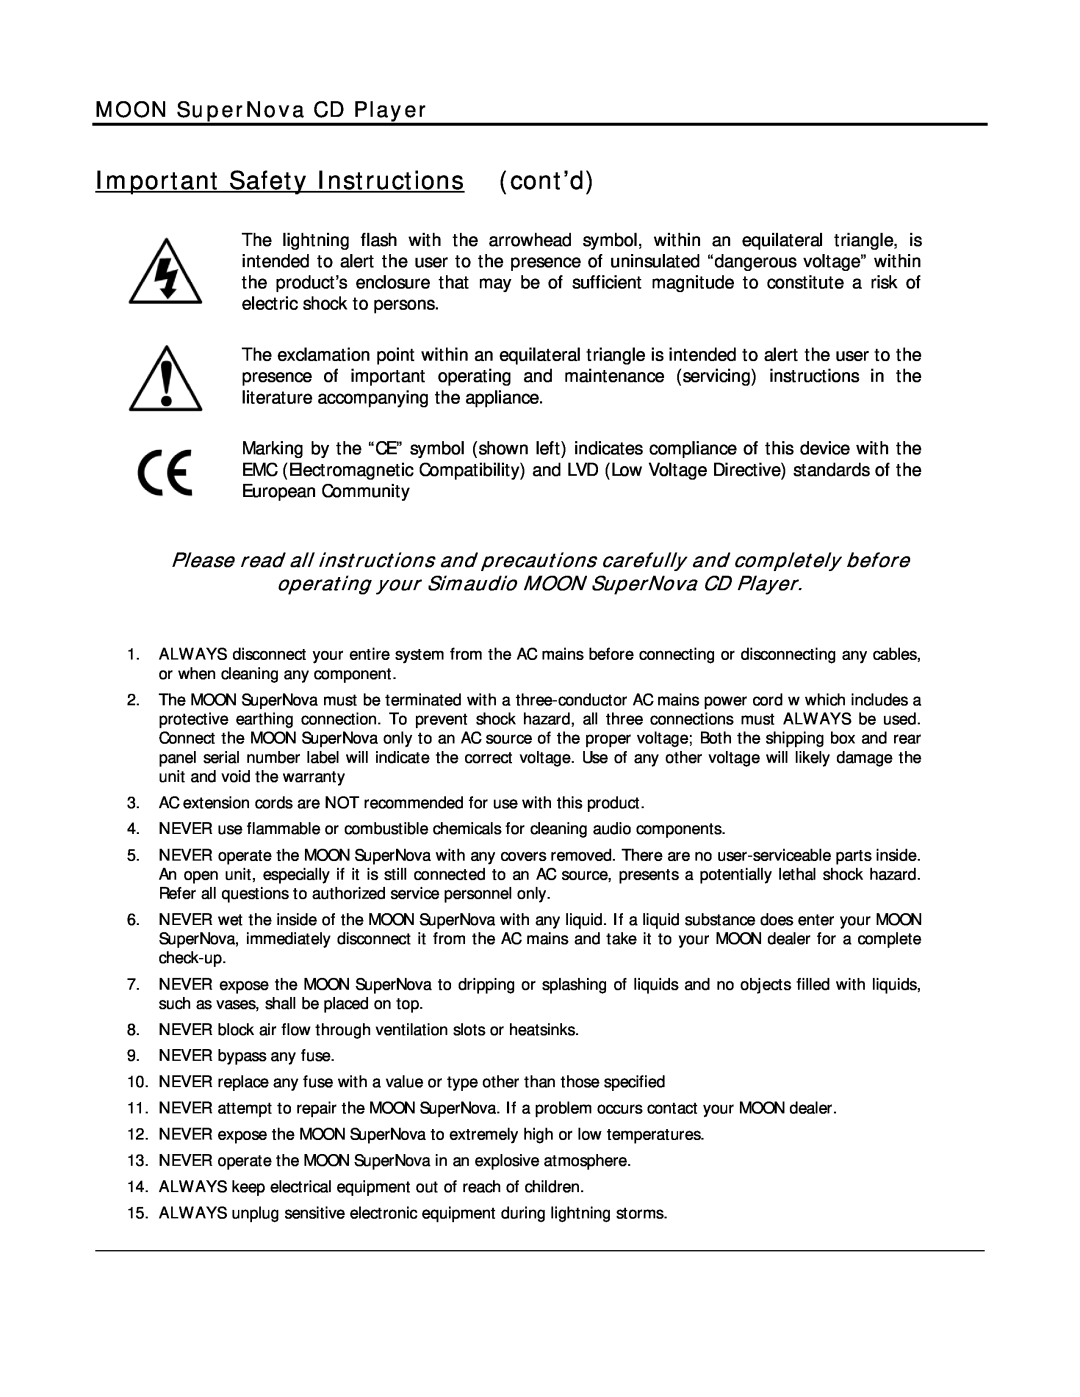 Simaudio owner manual Important Safety Instructionscont’d, MOON SuperNova CD Player 